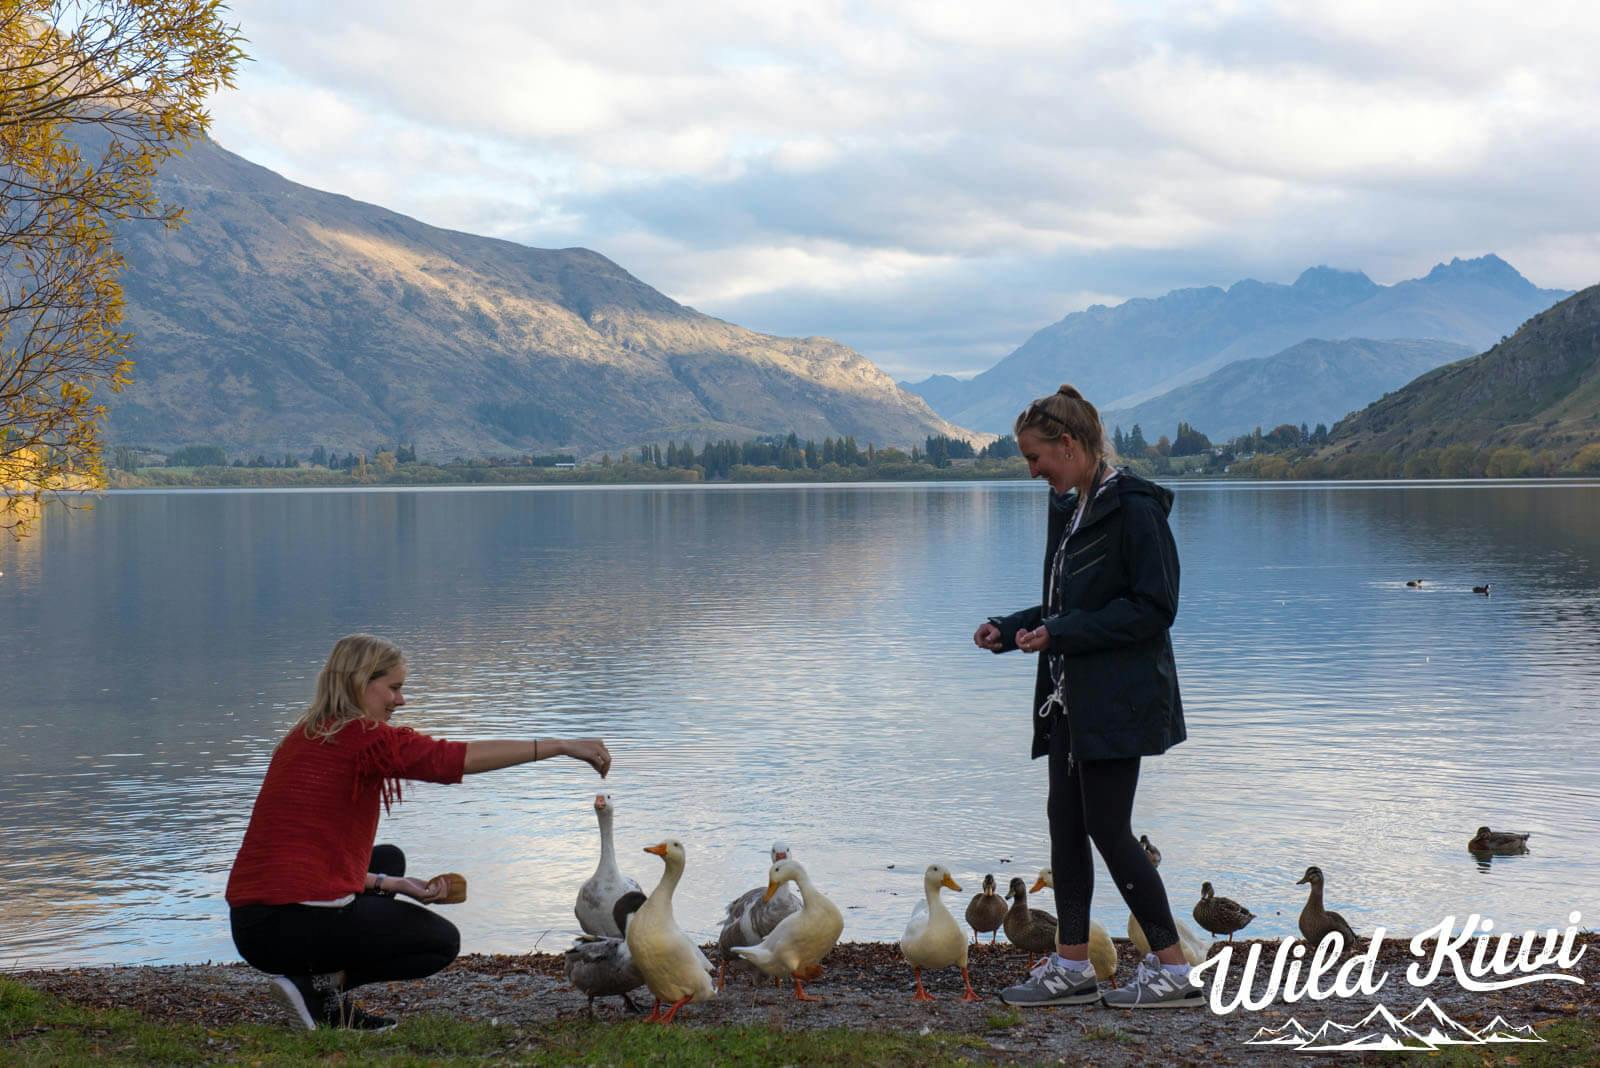 A New Zealand holiday like no other - Plan your road trip today